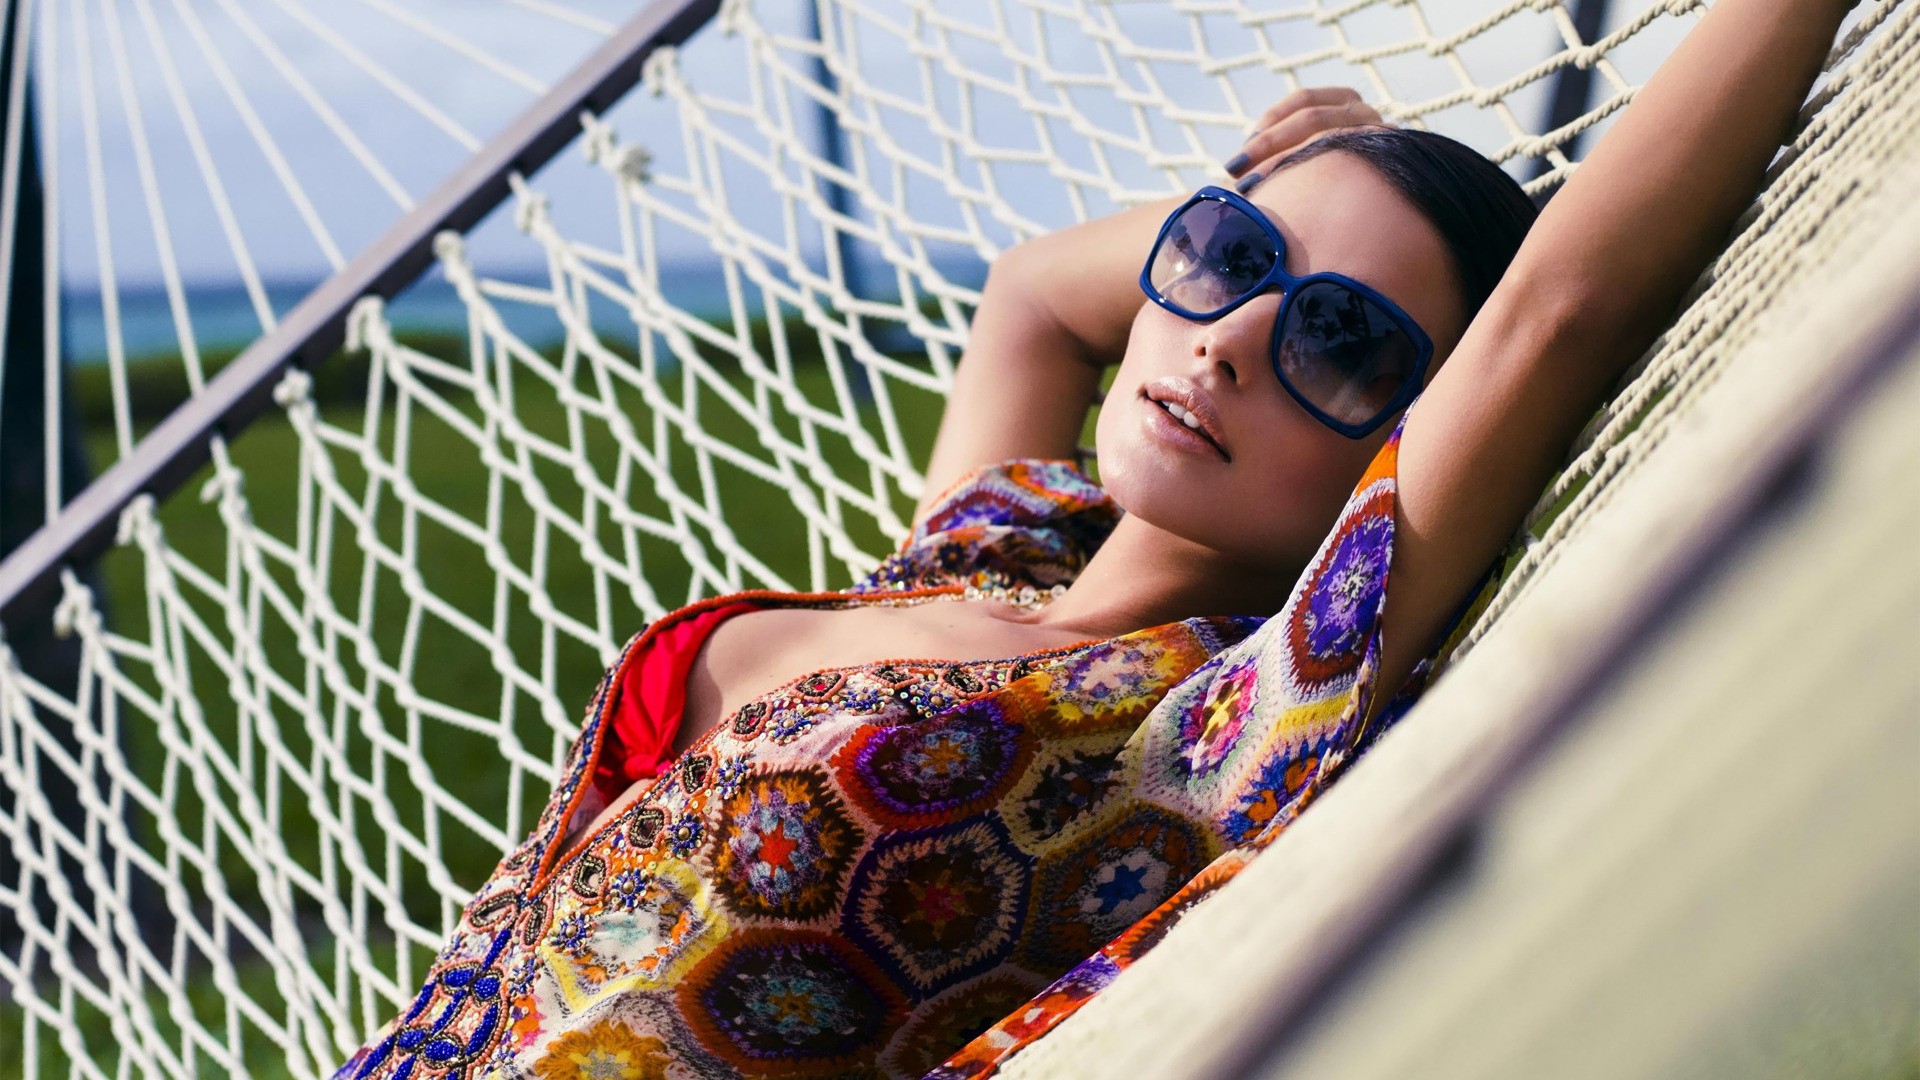 Diana Morales Blouses Sunglasses Colorful Hammocks Women With Glasses 1920x1080